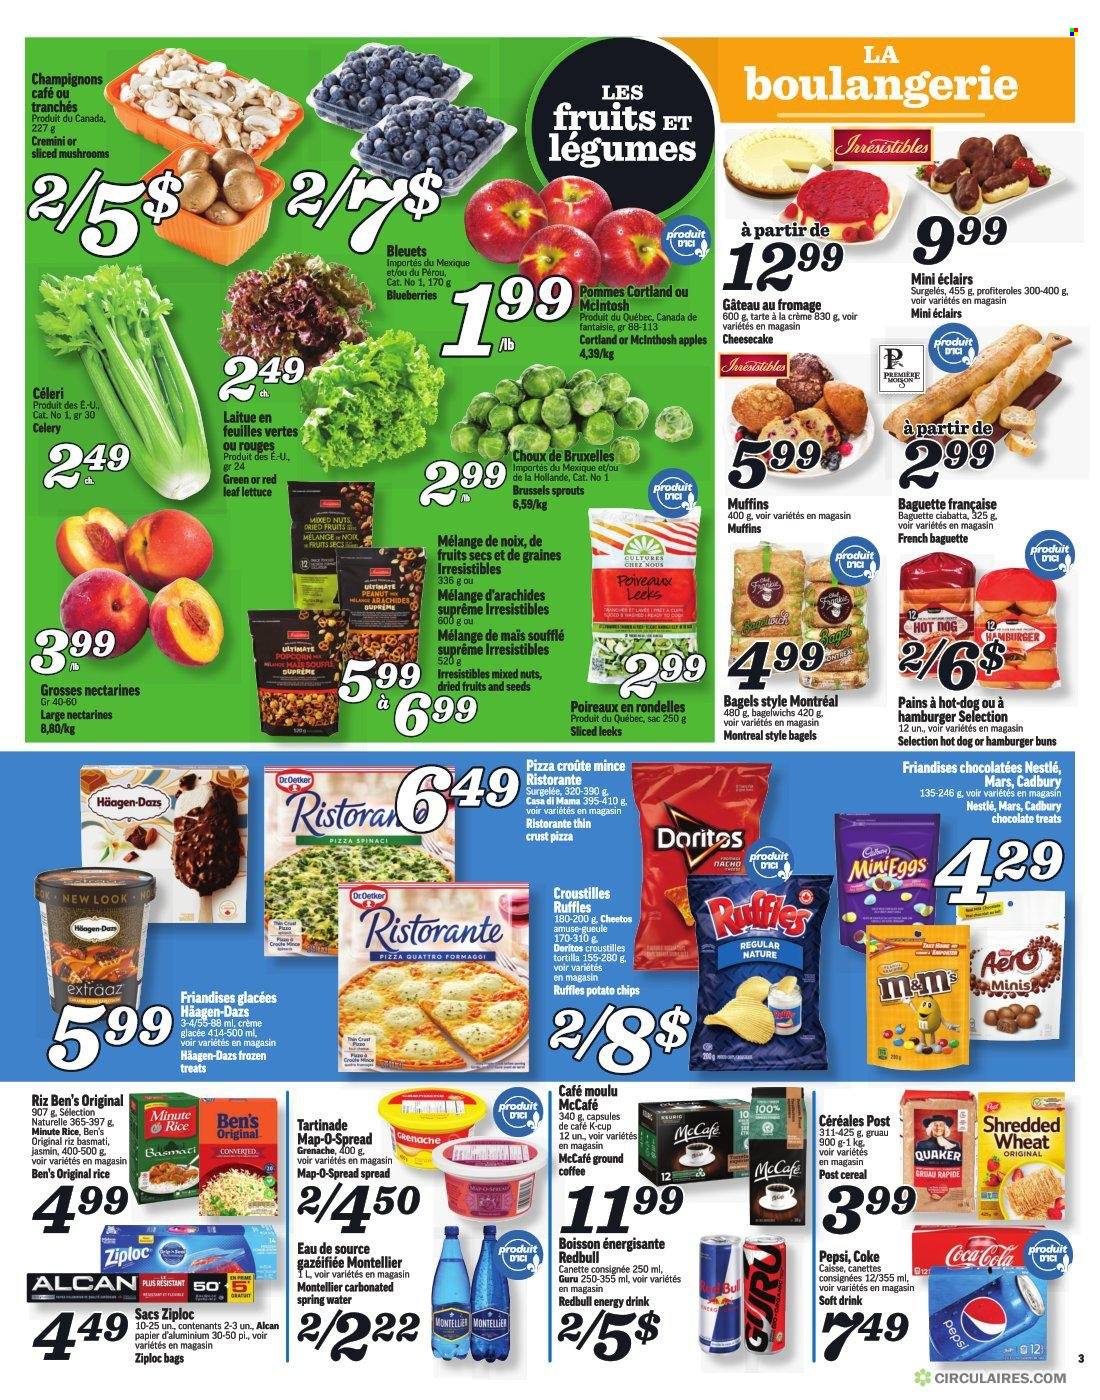 thumbnail - Marché Richelieu Flyer - March 16, 2023 - March 22, 2023 - Sales products - mushrooms, bagels, tortillas, buns, burger buns, muffin, celery, lettuce, brussel sprouts, apples, blueberries, nectarines, hot dog, pizza, Quaker, Dr. Oetker, Häagen-Dazs, chocolate, Mars, Cadbury, Doritos, potato chips, Cheetos, Ruffles, cereals, basmati rice, rice, mixed nuts, Coca-Cola, Pepsi, energy drink, soft drink, Coke, spring water, water, ground coffee, coffee capsules, McCafe, K-Cups, red wine, wine, Ziploc, baguette, ciabatta, Nestlé, M&M's. Page 3.